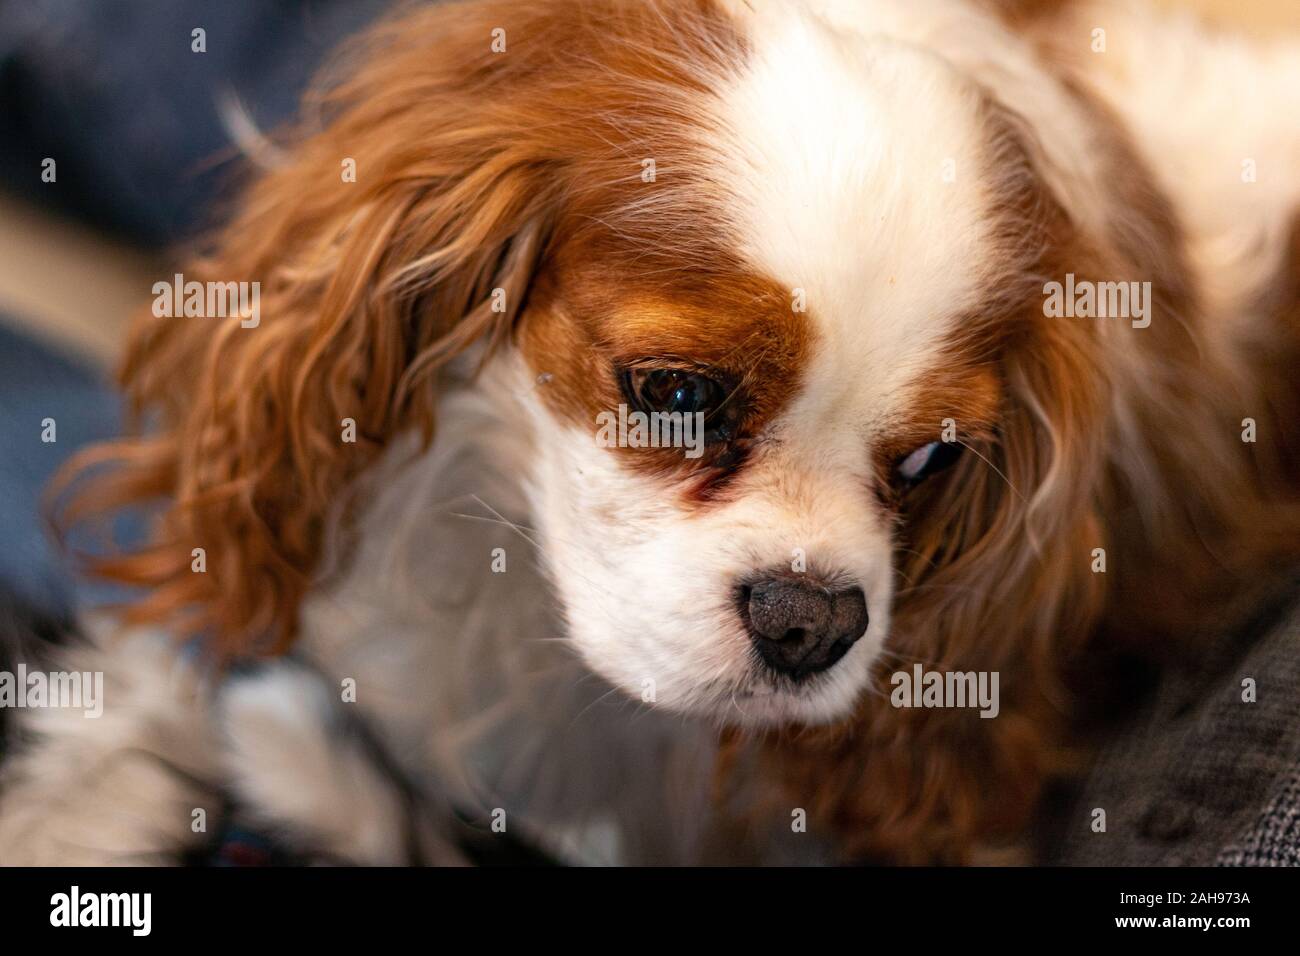 A purebred Cavalier King Charles Spaniel with Blenheim coloring is seen from a high angle. The dog looks to the side, showing the outline of her face. Stock Photo